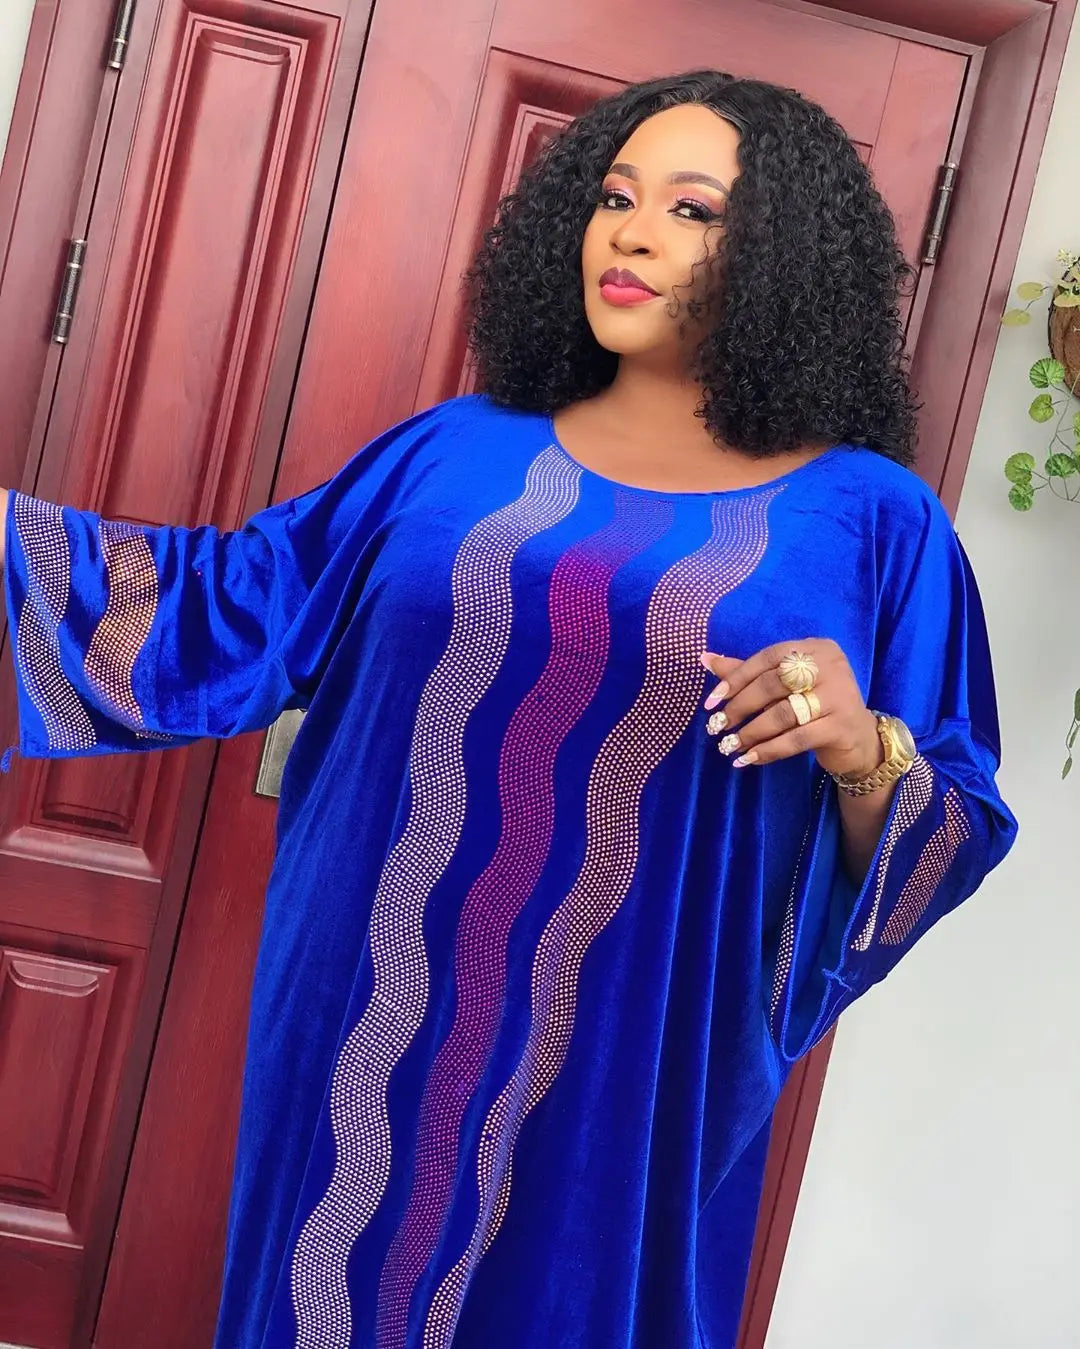 Velvet Elegance: High Quality African Maxi Dresses for Women - Flexi Africa - Flexi Africa offers Free Delivery Worldwide - Vibrant African traditional clothing showcasing bold prints and intricate designs